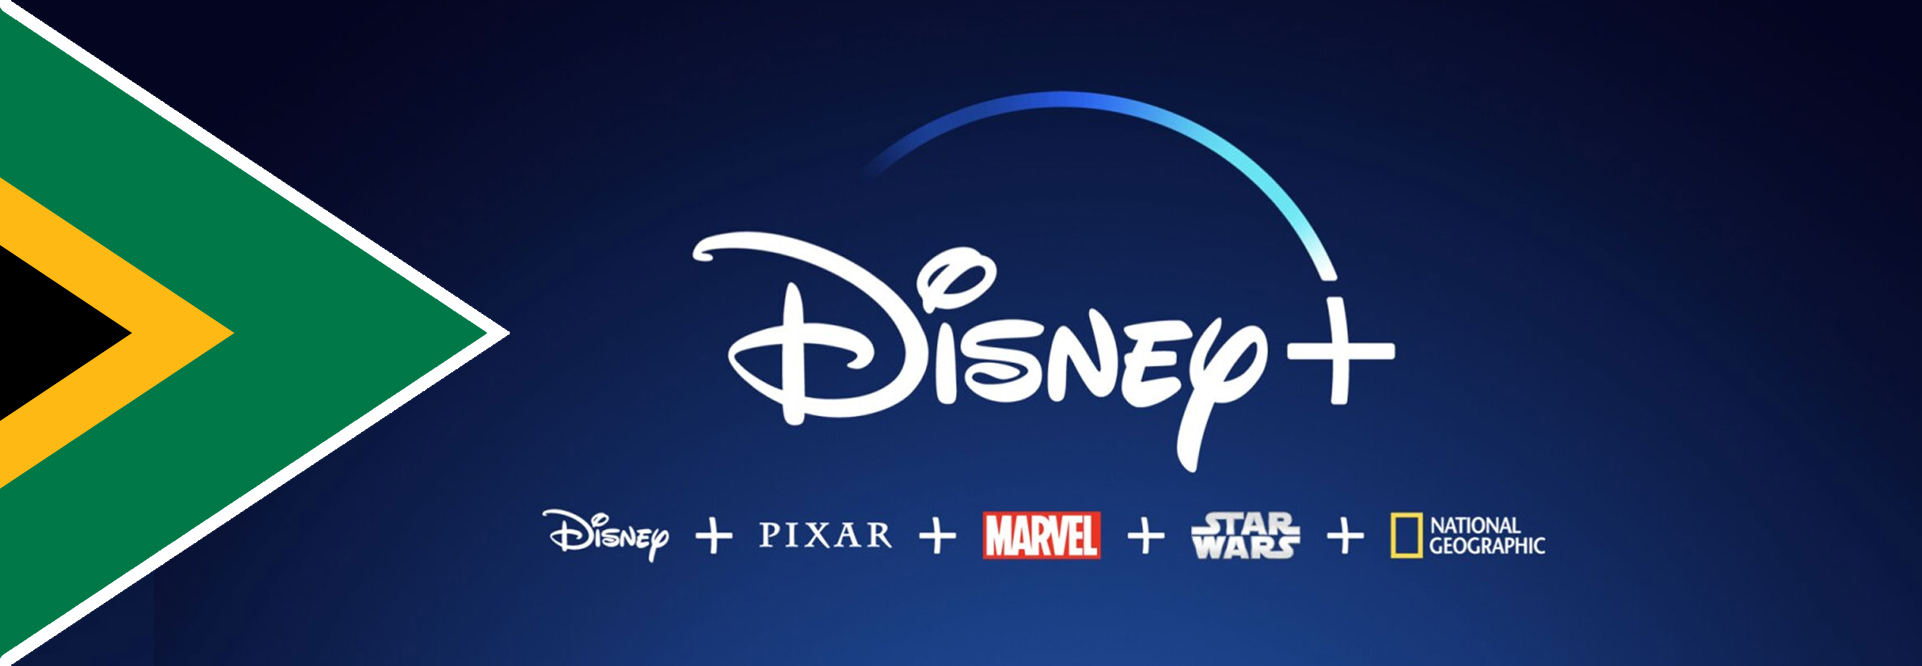 Disney+ in South Africa: Everything You Need to Know!